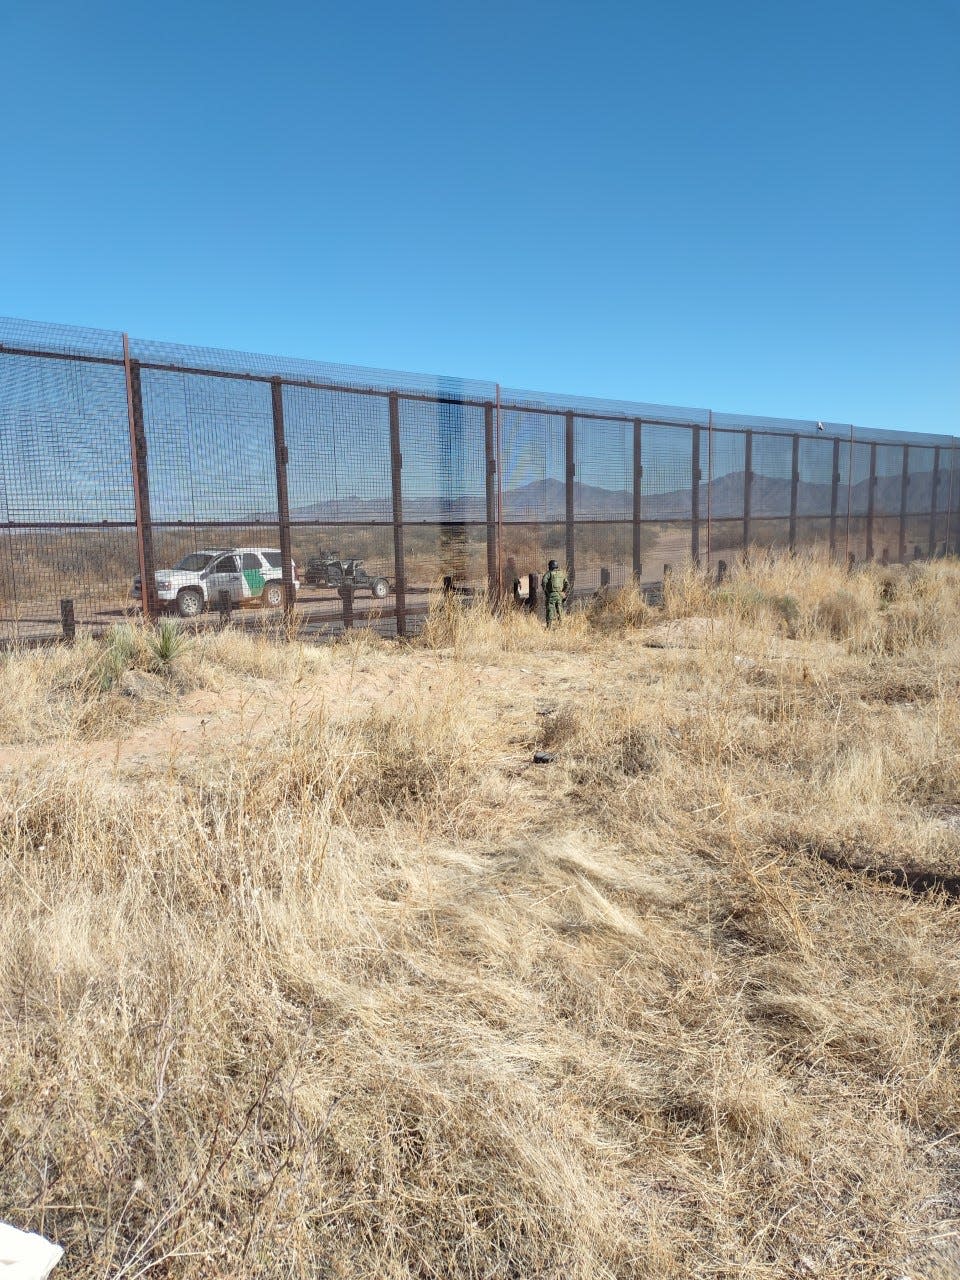 Border agents from the United States and Mexico chat while on opposite sides of the border wall near Sunland Park, New Mexico, on Dec. 29, 2021.